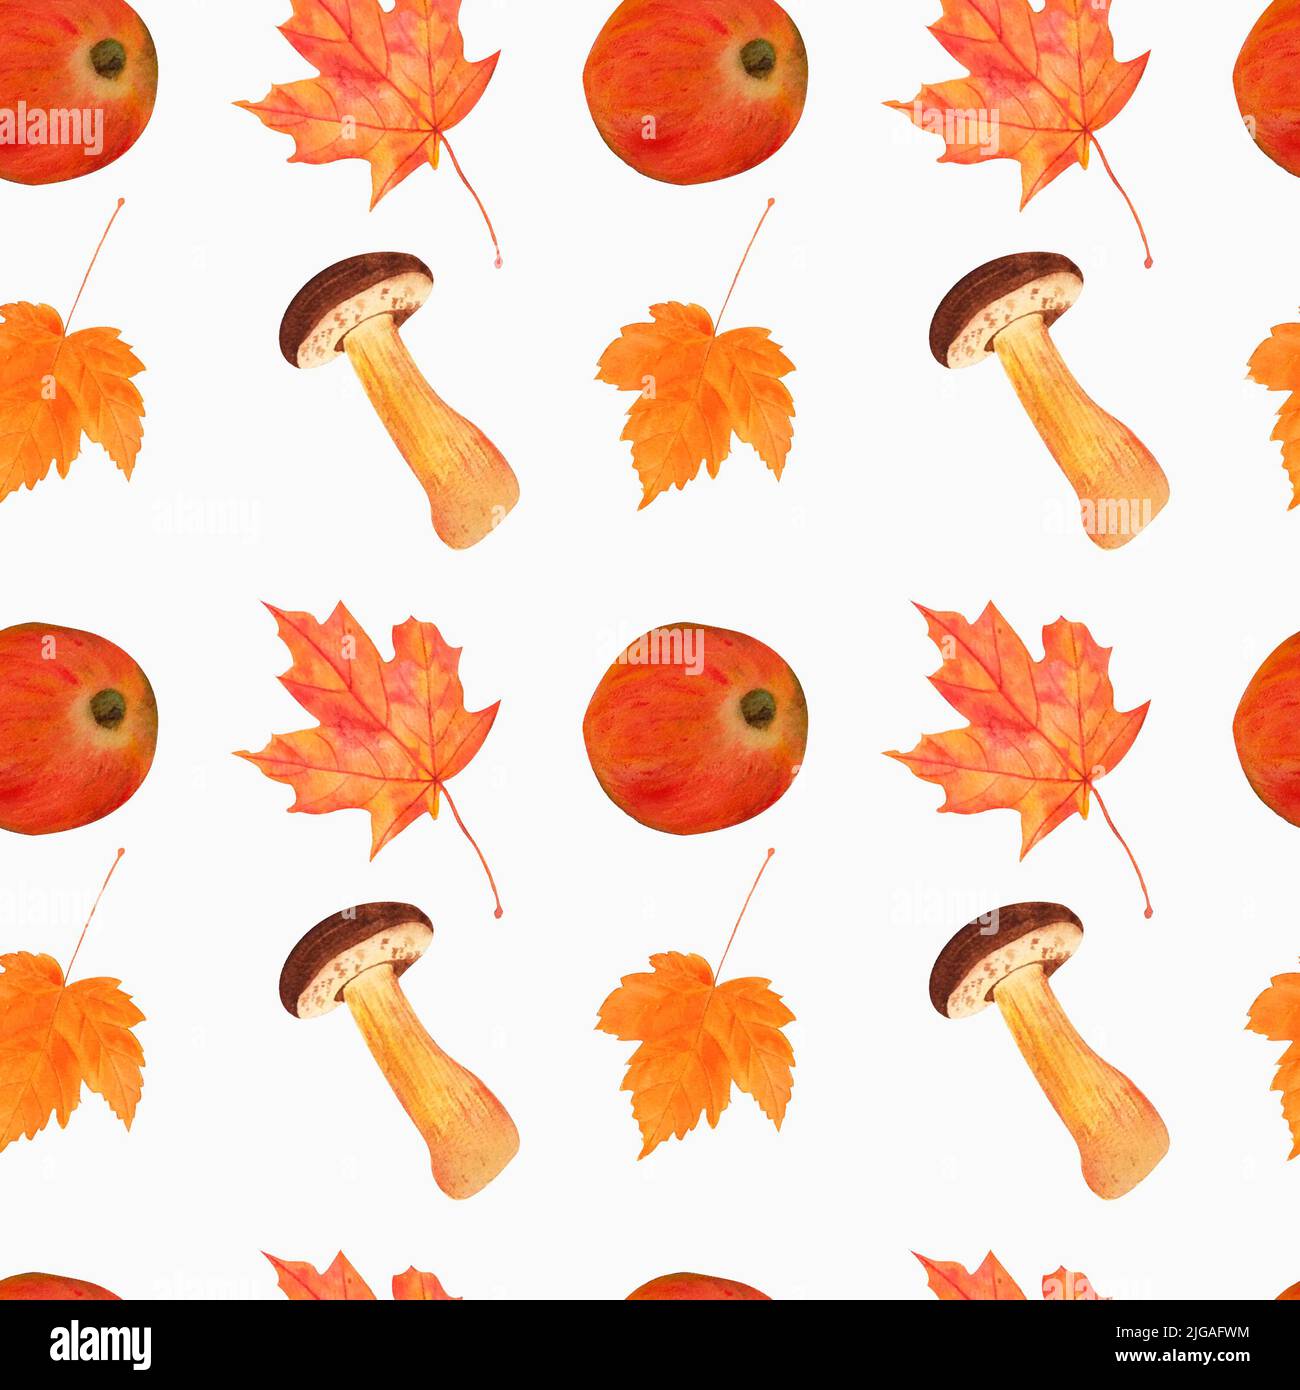 seamless watercolor pattern of illustrations of mushrooms, juicy ripe red apple, maple leaf. On white background. autumn illustration, hand drawn. Per Stock Photo